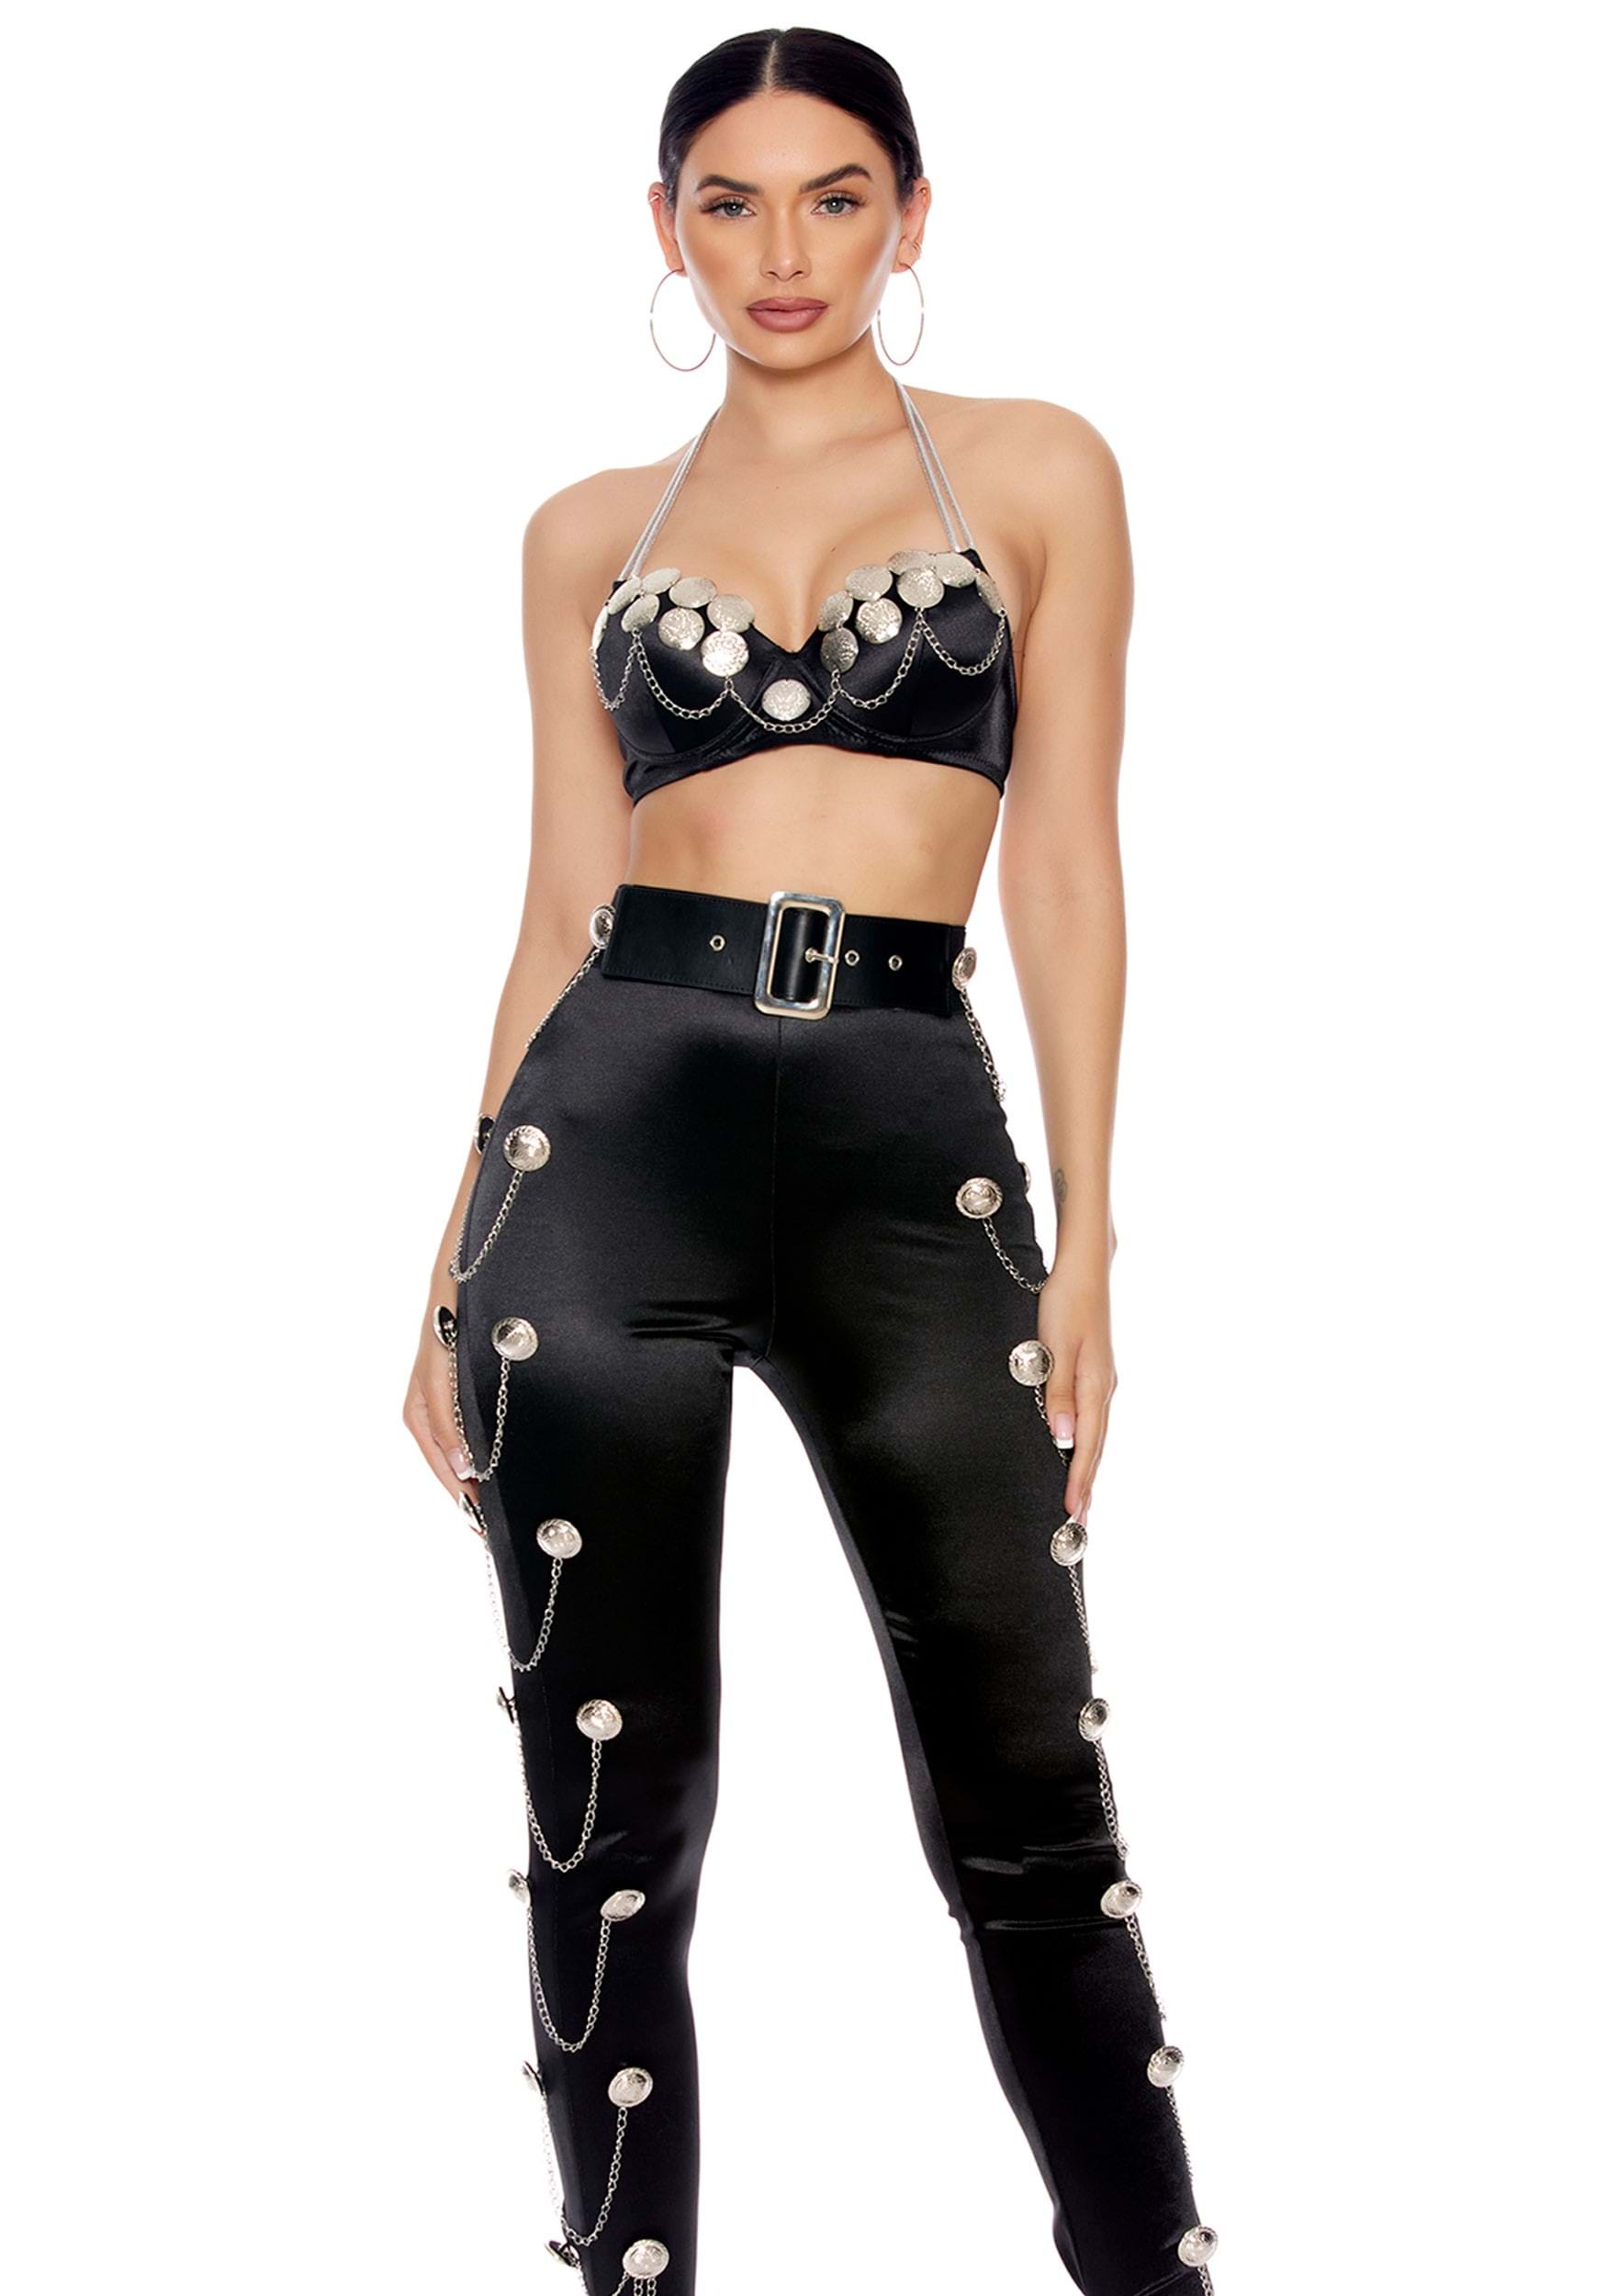 Image of Sexy Cumbia Queen Celebrity Women's Costume ID FP553144-L/XL